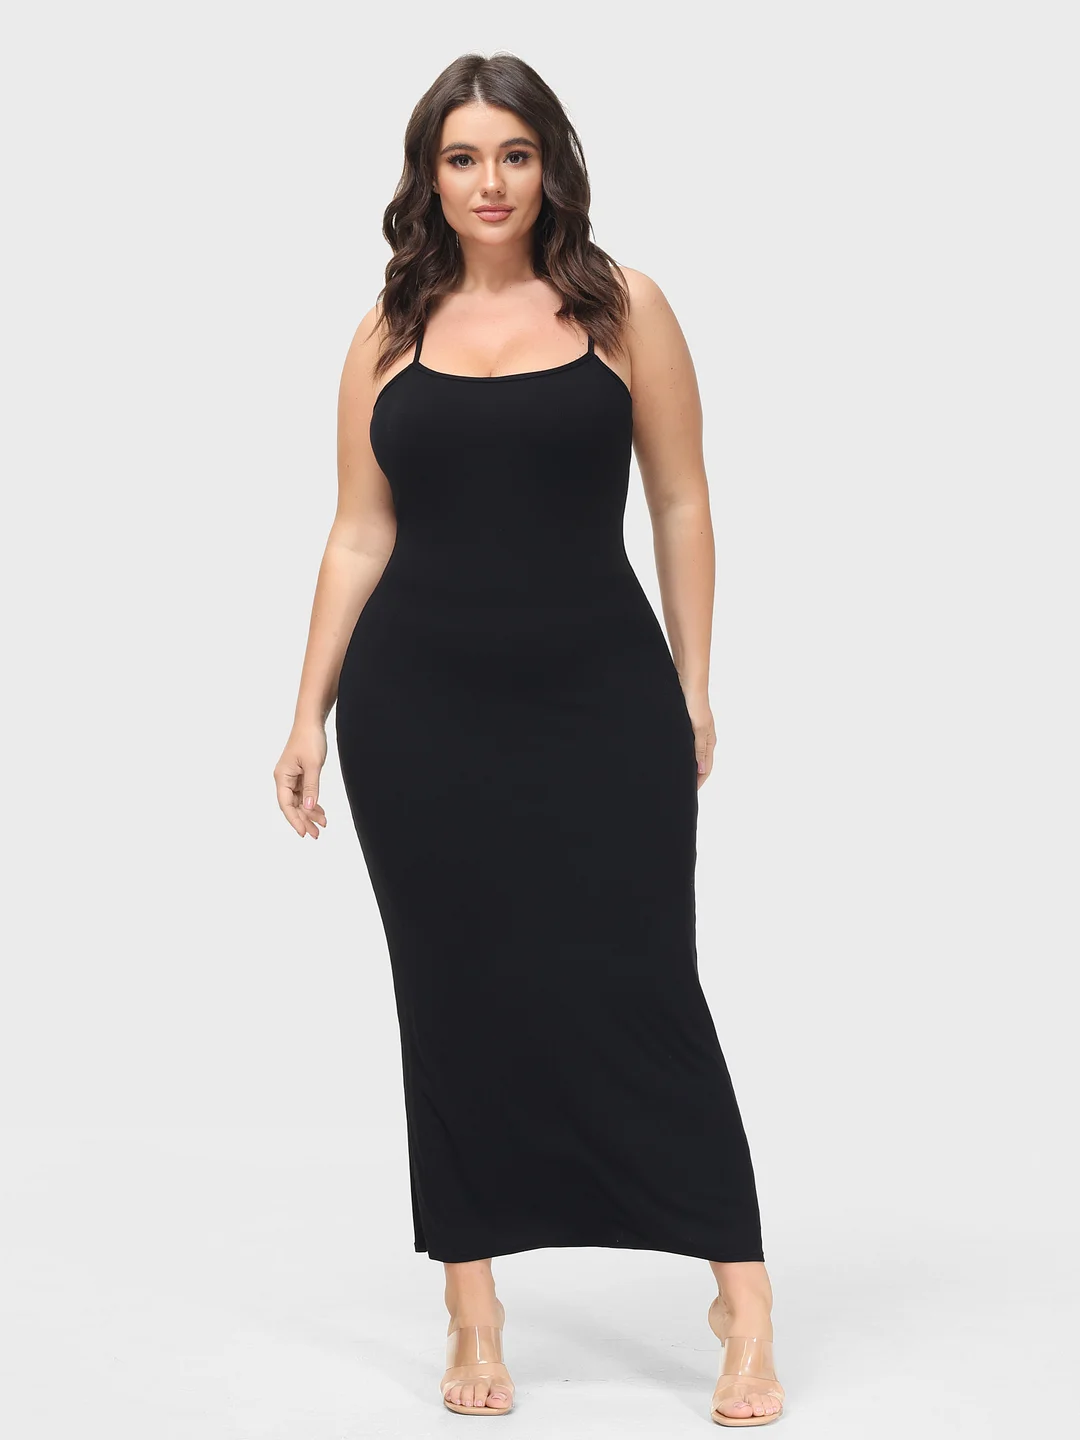 Built-in Shapewear Lounge Dresses (Buy 2 Free Shipping)